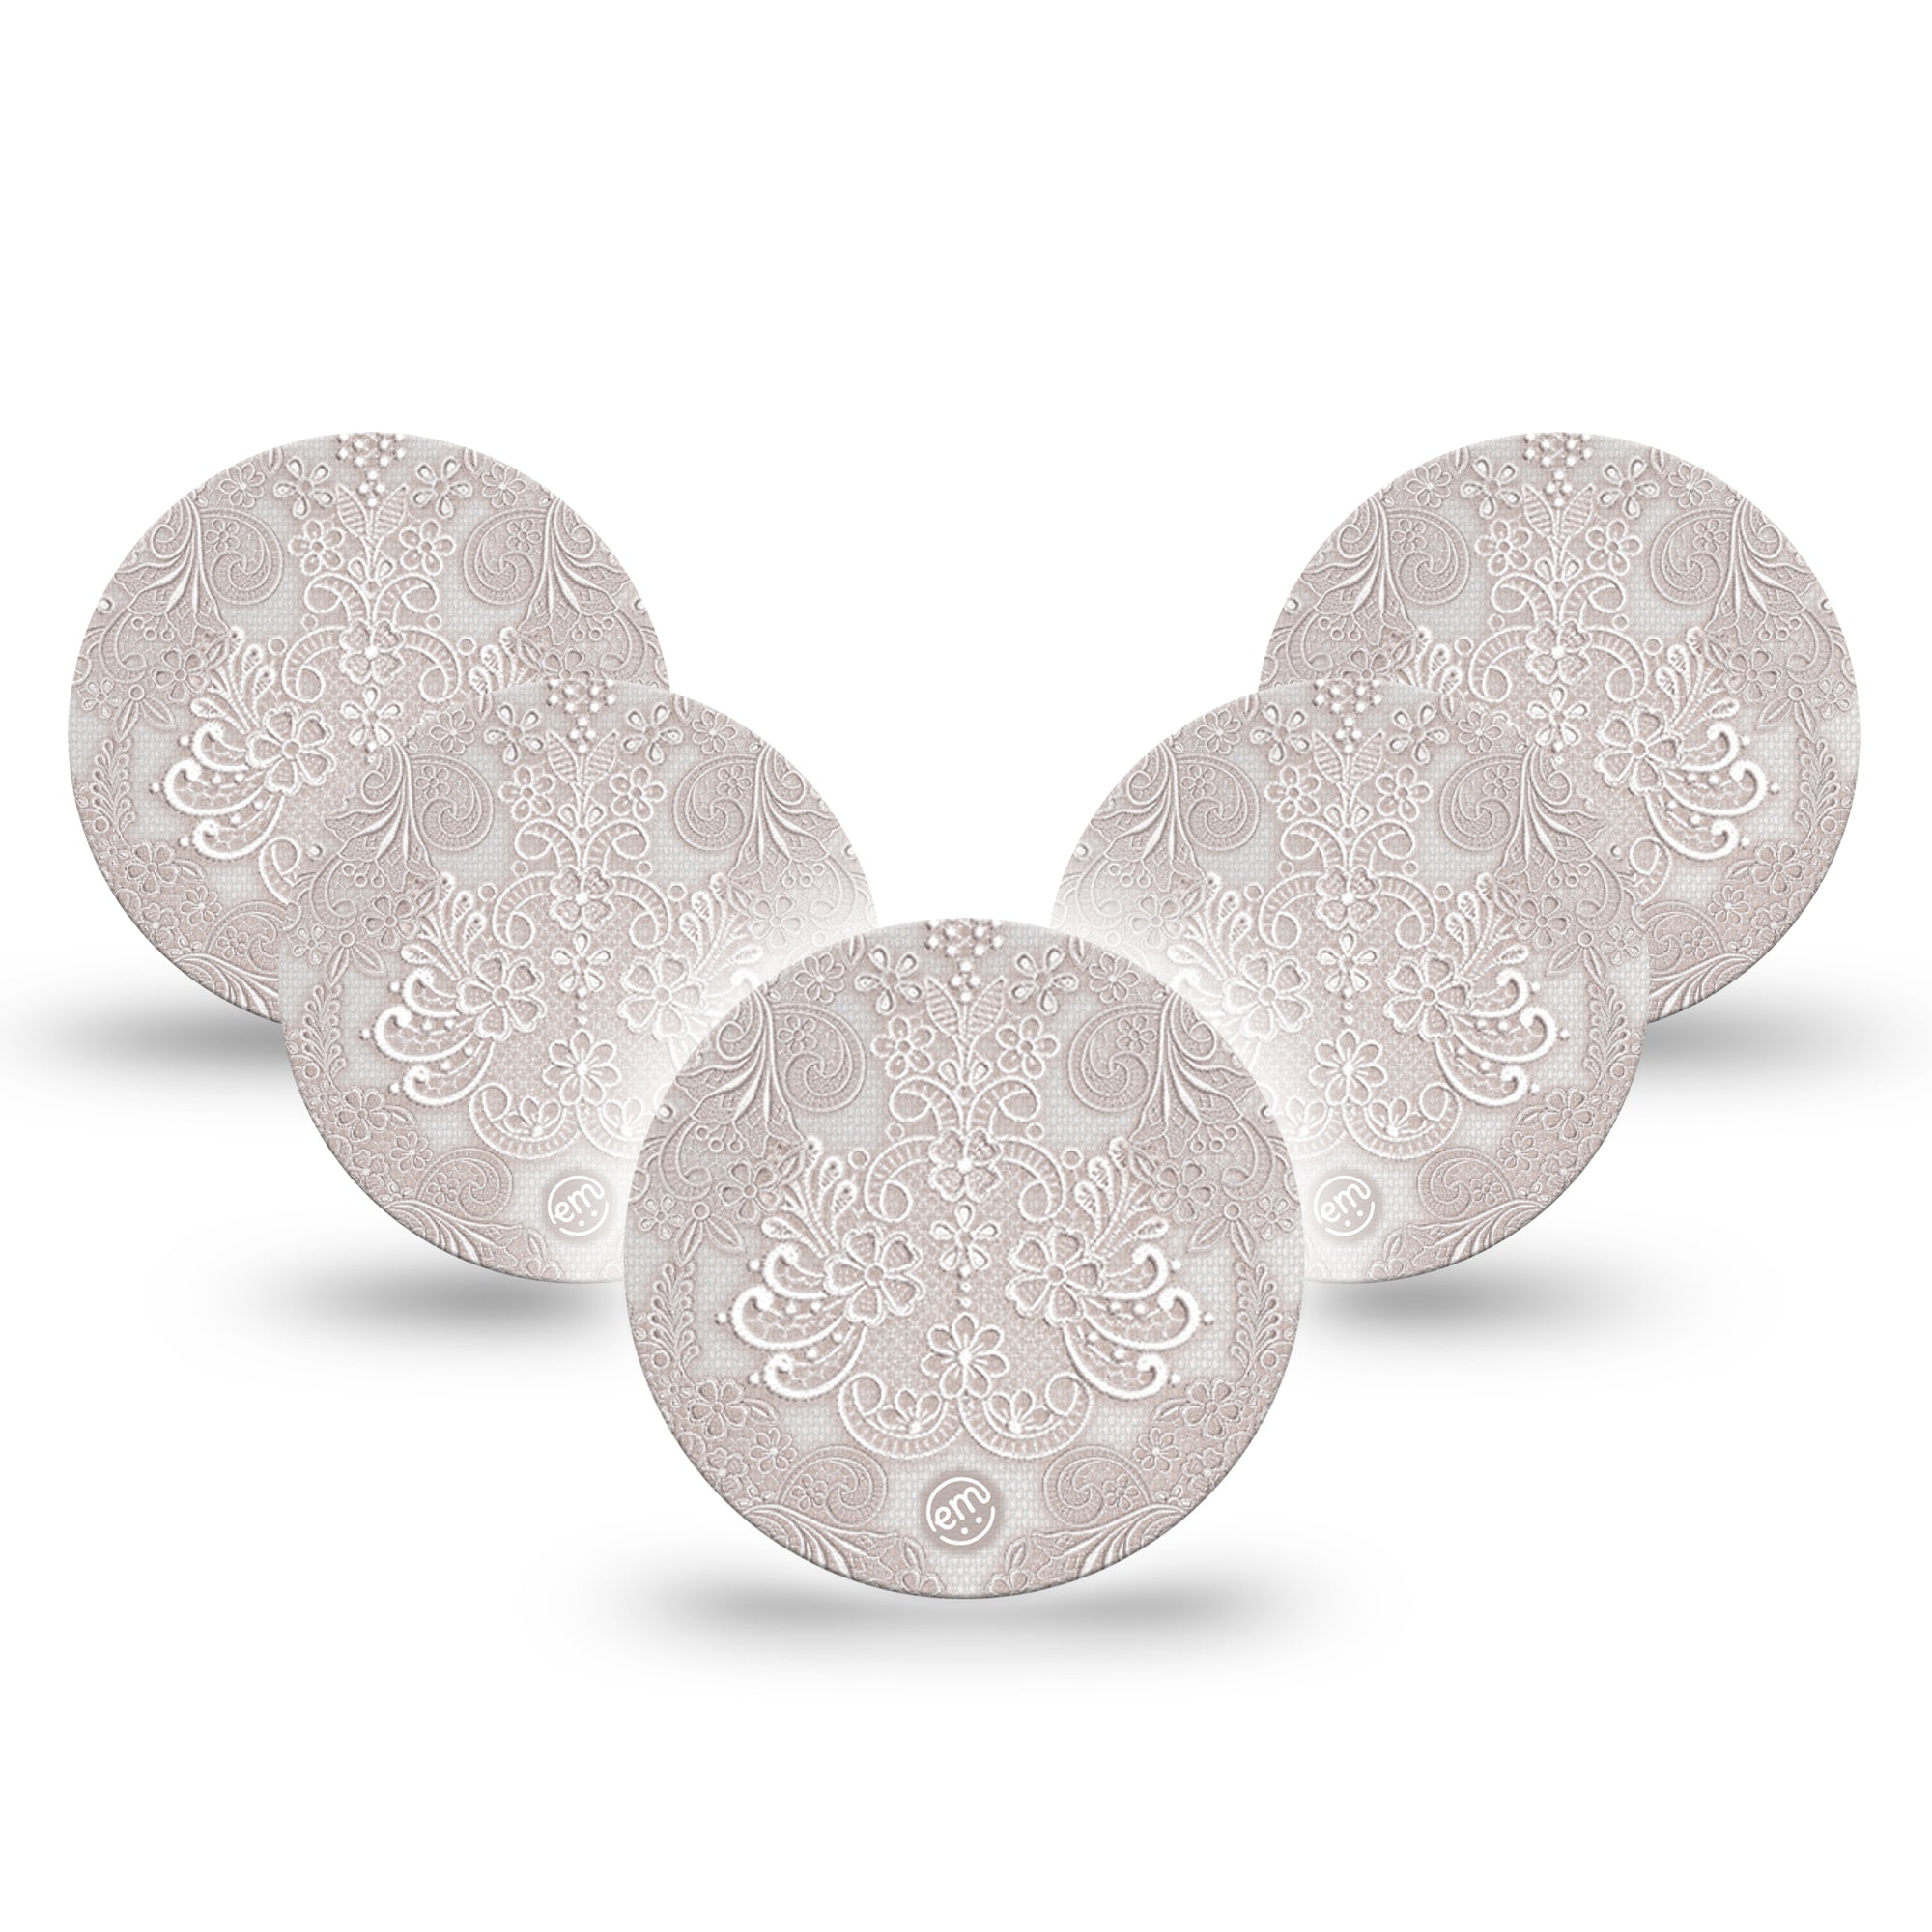 ExpressionMed Vintage Lace Libre 3 Overpatch, 5-Pack, Delicate White Lace Inspired, CGM Adhesive Tape Design